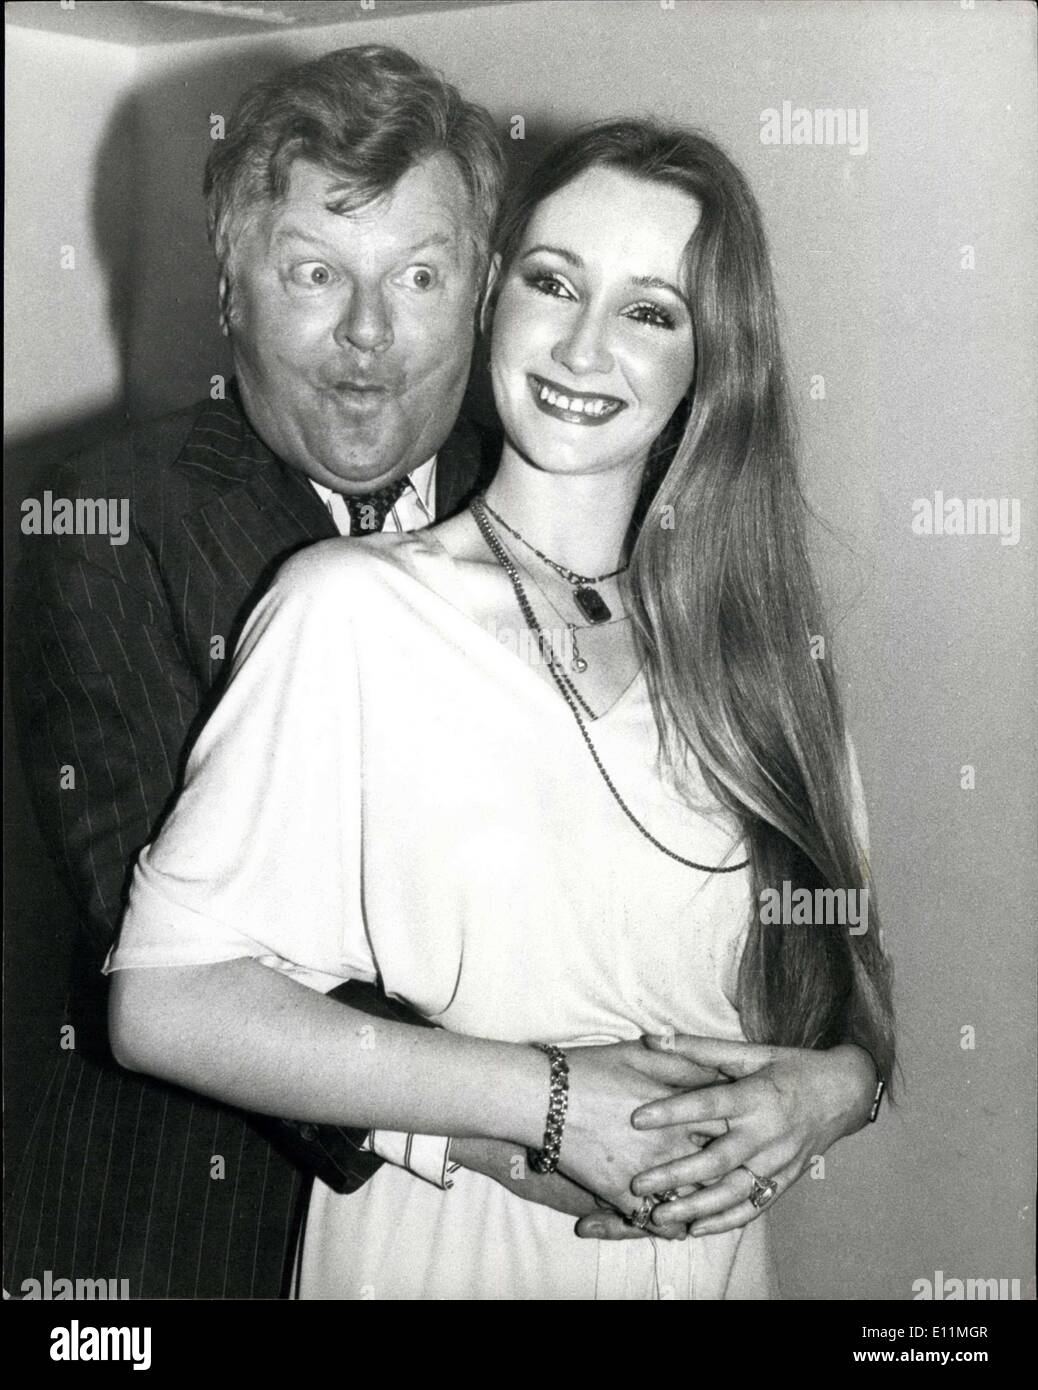 Feb. 05, 1979 - Benny Hill ITV personality of 1979: ITV Personality for 1979: Benny Hill for his Benny Hill show series and success in America, was named at the 28th annual Show Business Awards luncheon at the Savoy Hotel today. Photo shows Benny Hill puts his arms around Karen Dotrice, voted film actress of the year for her performance in ''The 39 steps'' during the luncheon at the Savoy Hotel today. Stock Photo